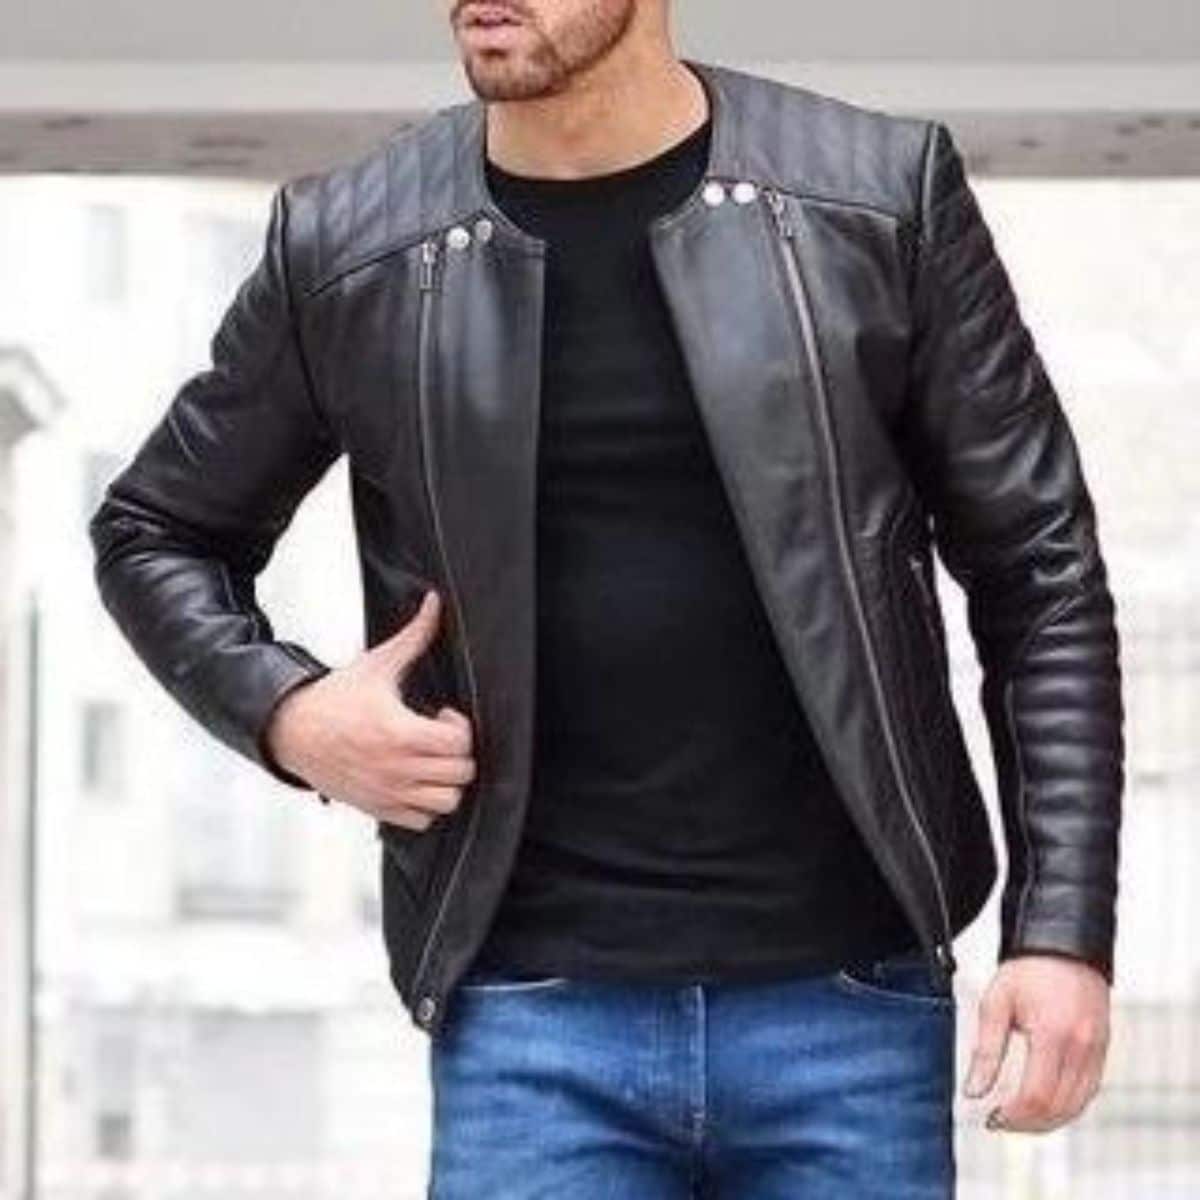 A man wears a leather jacket and a blue jeans.